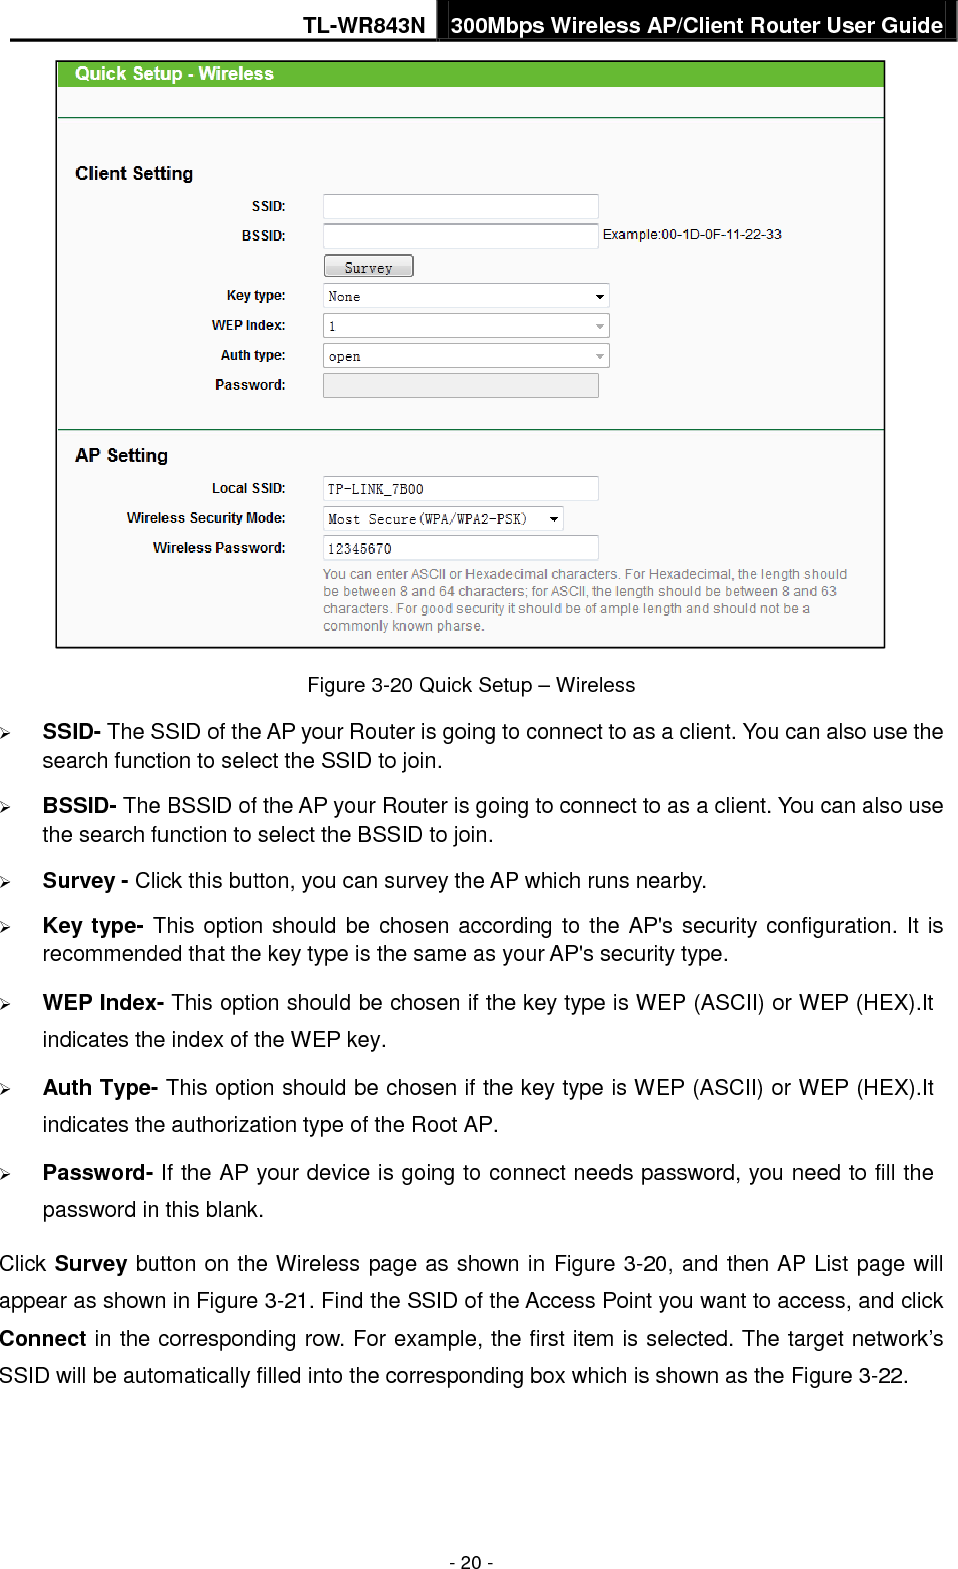 TL-WR843N 300Mbps Wireless AP/Client Router User Guide - 20 - Figure 3-20 Quick Setup – Wireless SSID- The SSID of the AP your Router is going to connect to as a client. You can also use thesearch function to select the SSID to join.BSSID- The BSSID of the AP your Router is going to connect to as a client. You can also usethe search function to select the BSSID to join.Survey - Click this button, you can survey the AP which runs nearby.Key type- This option should be chosen according to the AP&apos;s security configuration. It isrecommended that the key type is the same as your AP&apos;s security type.WEP Index- This option should be chosen if the key type is WEP (ASCII) or WEP (HEX).Itindicates the index of the WEP key.Auth Type- This option should be chosen if the key type is WEP (ASCII) or WEP (HEX).Itindicates the authorization type of the Root AP.Password- If the AP your device is going to connect needs password, you need to fill thepassword in this blank.Click Survey button on the Wireless page as shown in Figure 3-20, and then AP List page will appear as shown in Figure 3-21. Find the SSID of the Access Point you want to access, and click Connect in the corresponding row. For example, the first item is selected. The target network’s SSID will be automatically filled into the corresponding box which is shown as the Figure 3-22. 